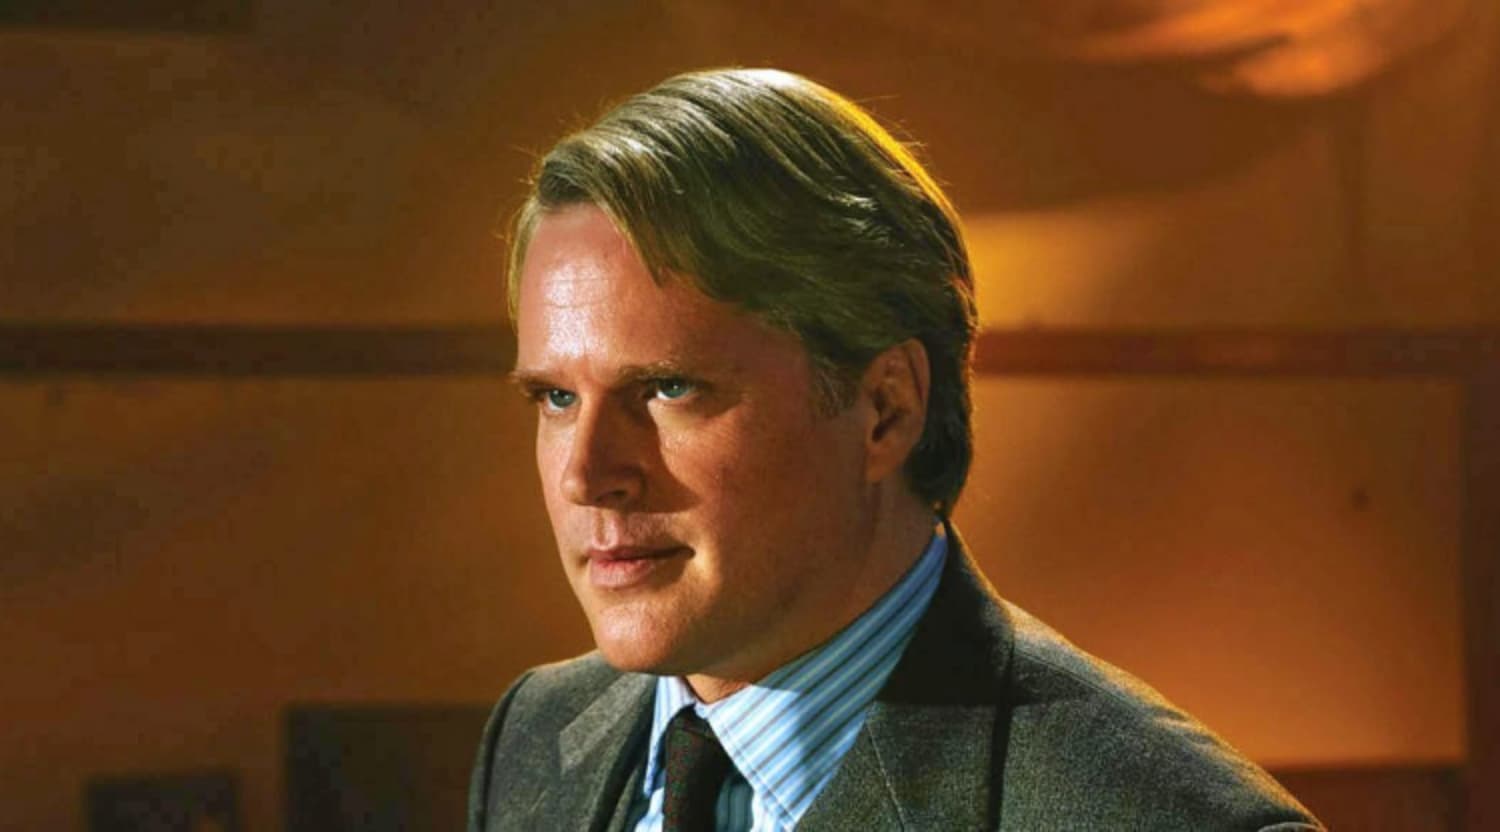 Cary Elwes Wiki, Bio, Age, Net Worth, and Other Facts